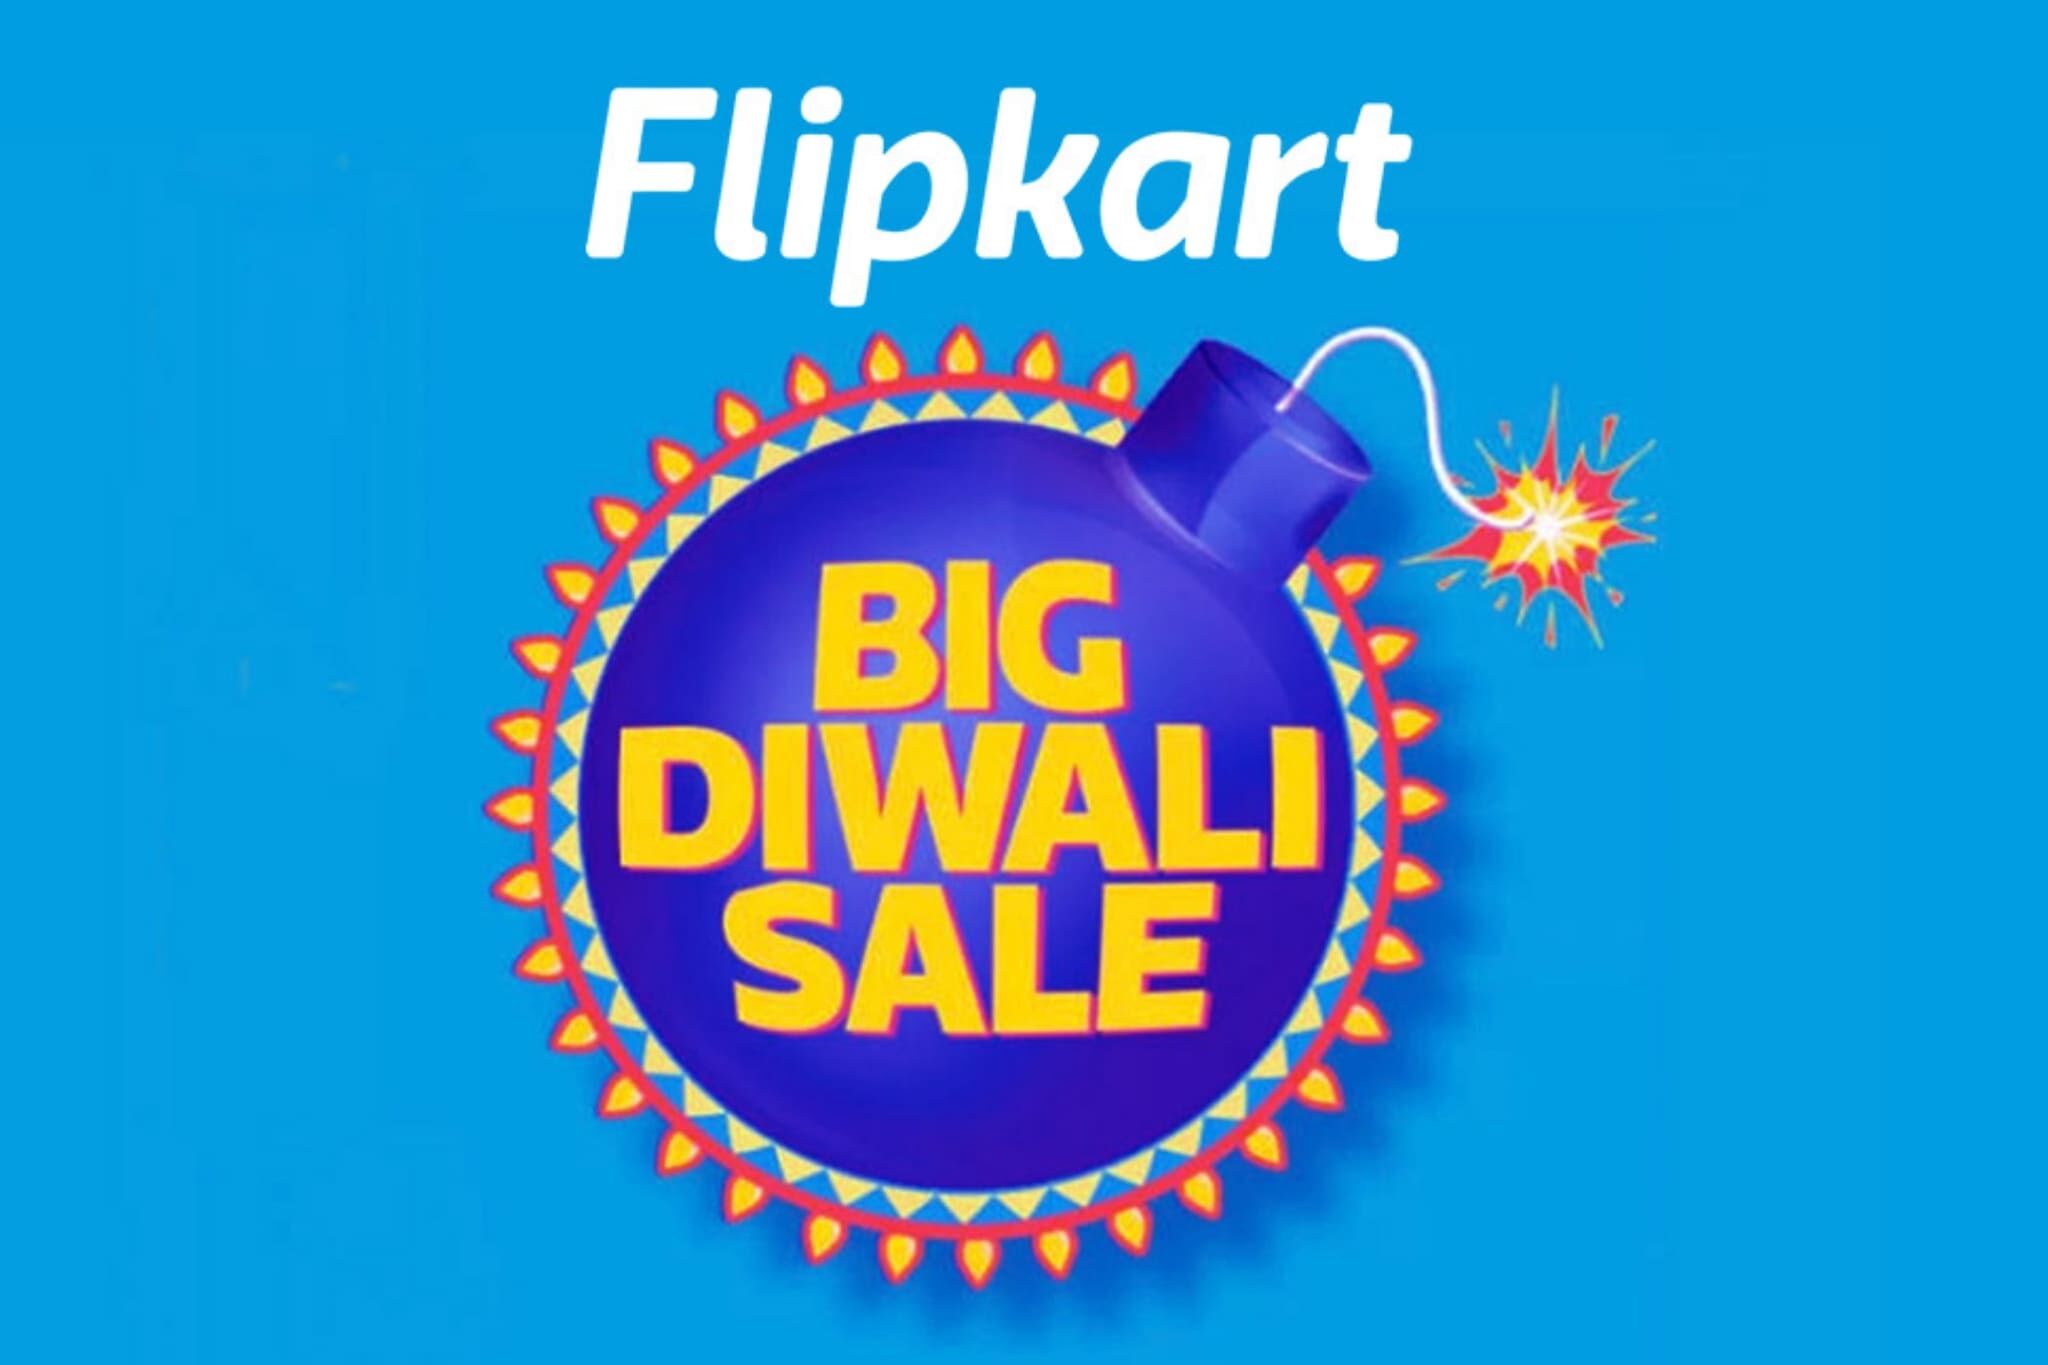 Flipkart Big Diwali Sale 2022 is starting from this date, you will get huge discounts on many items including smartphones, know offers